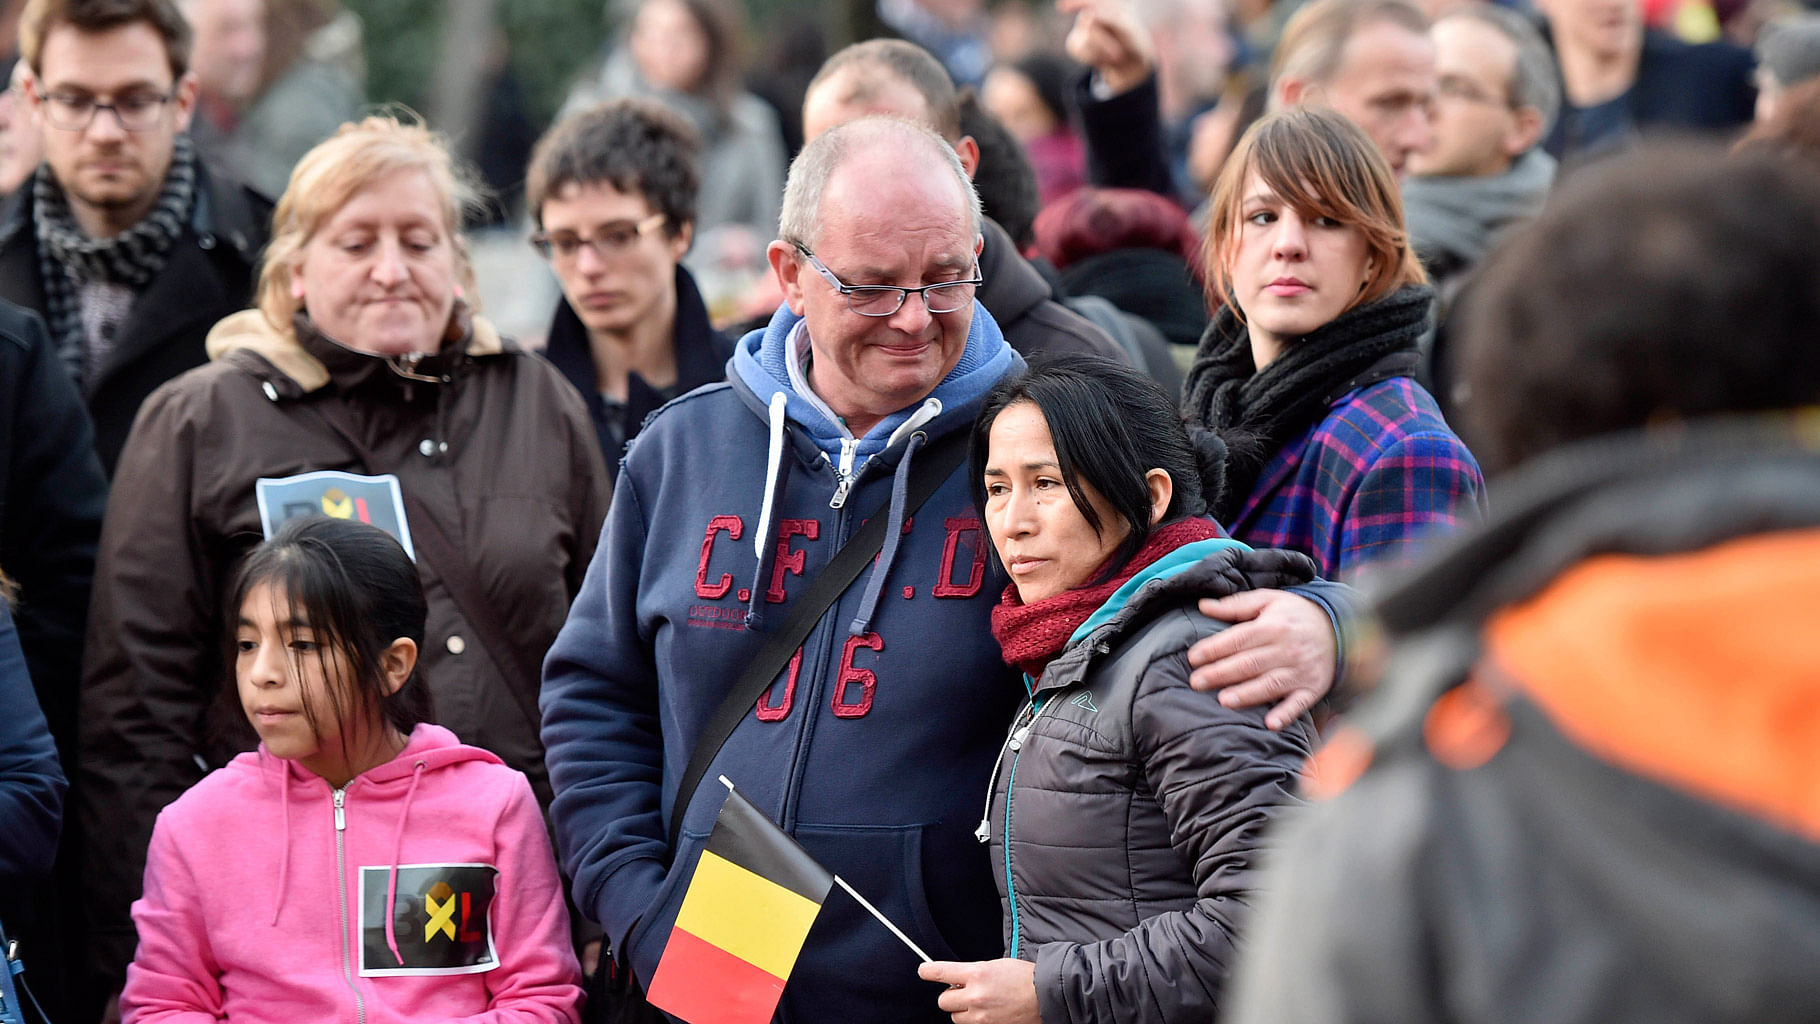 People mourn for the victims at Place de la Bourse in the center of Brussels, Tuesday, March 22, 2016. (Photo: AP)